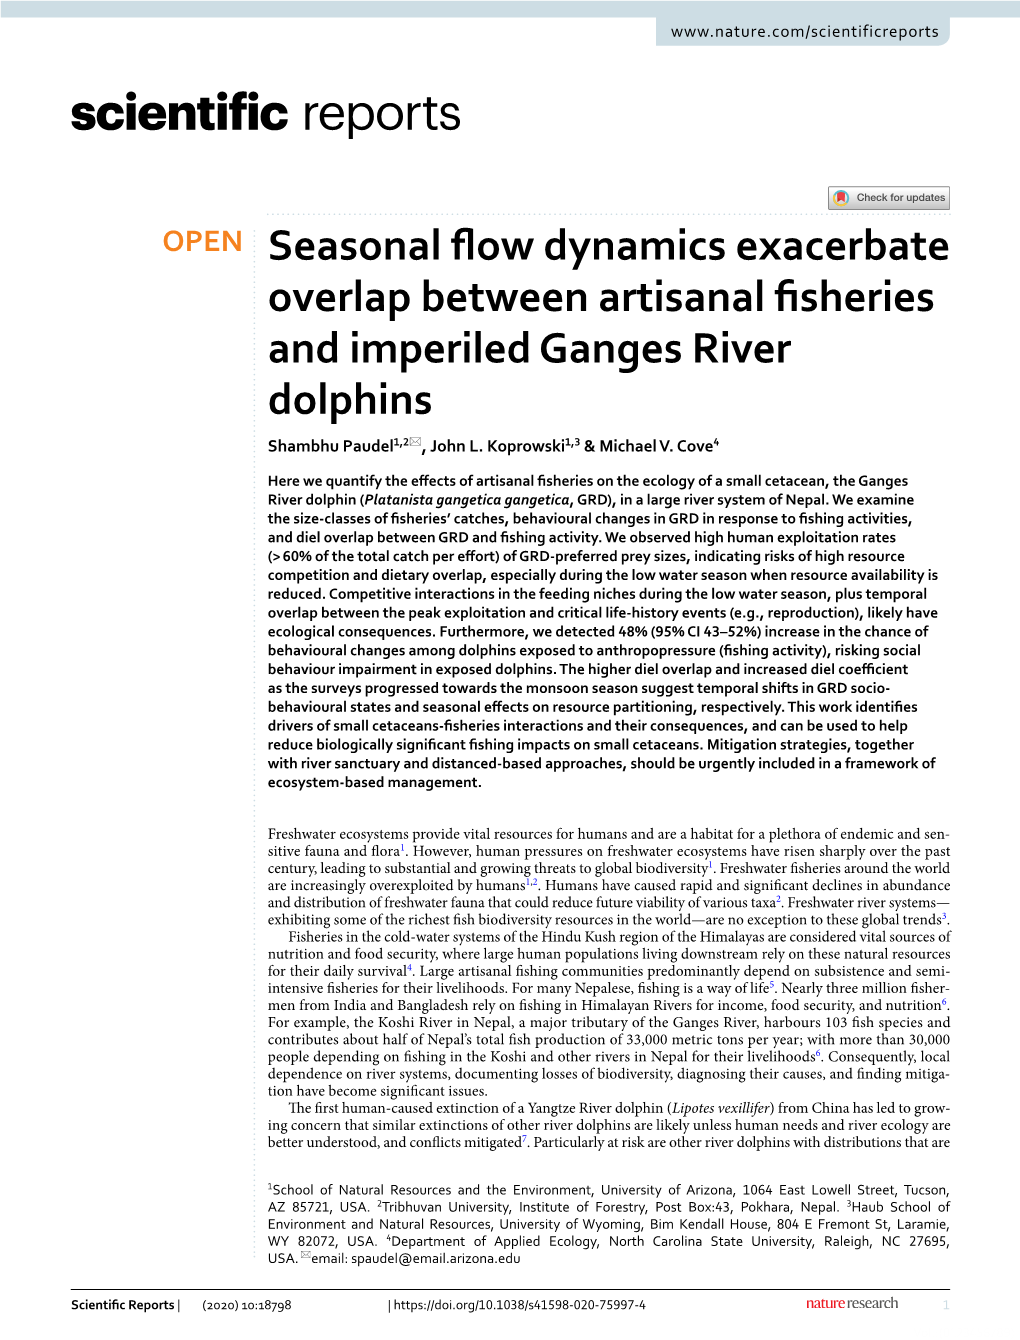 Seasonal Flow Dynamics Exacerbate Overlap Between Artisanal Fisheries and Imperiled Ganges River Dolphins